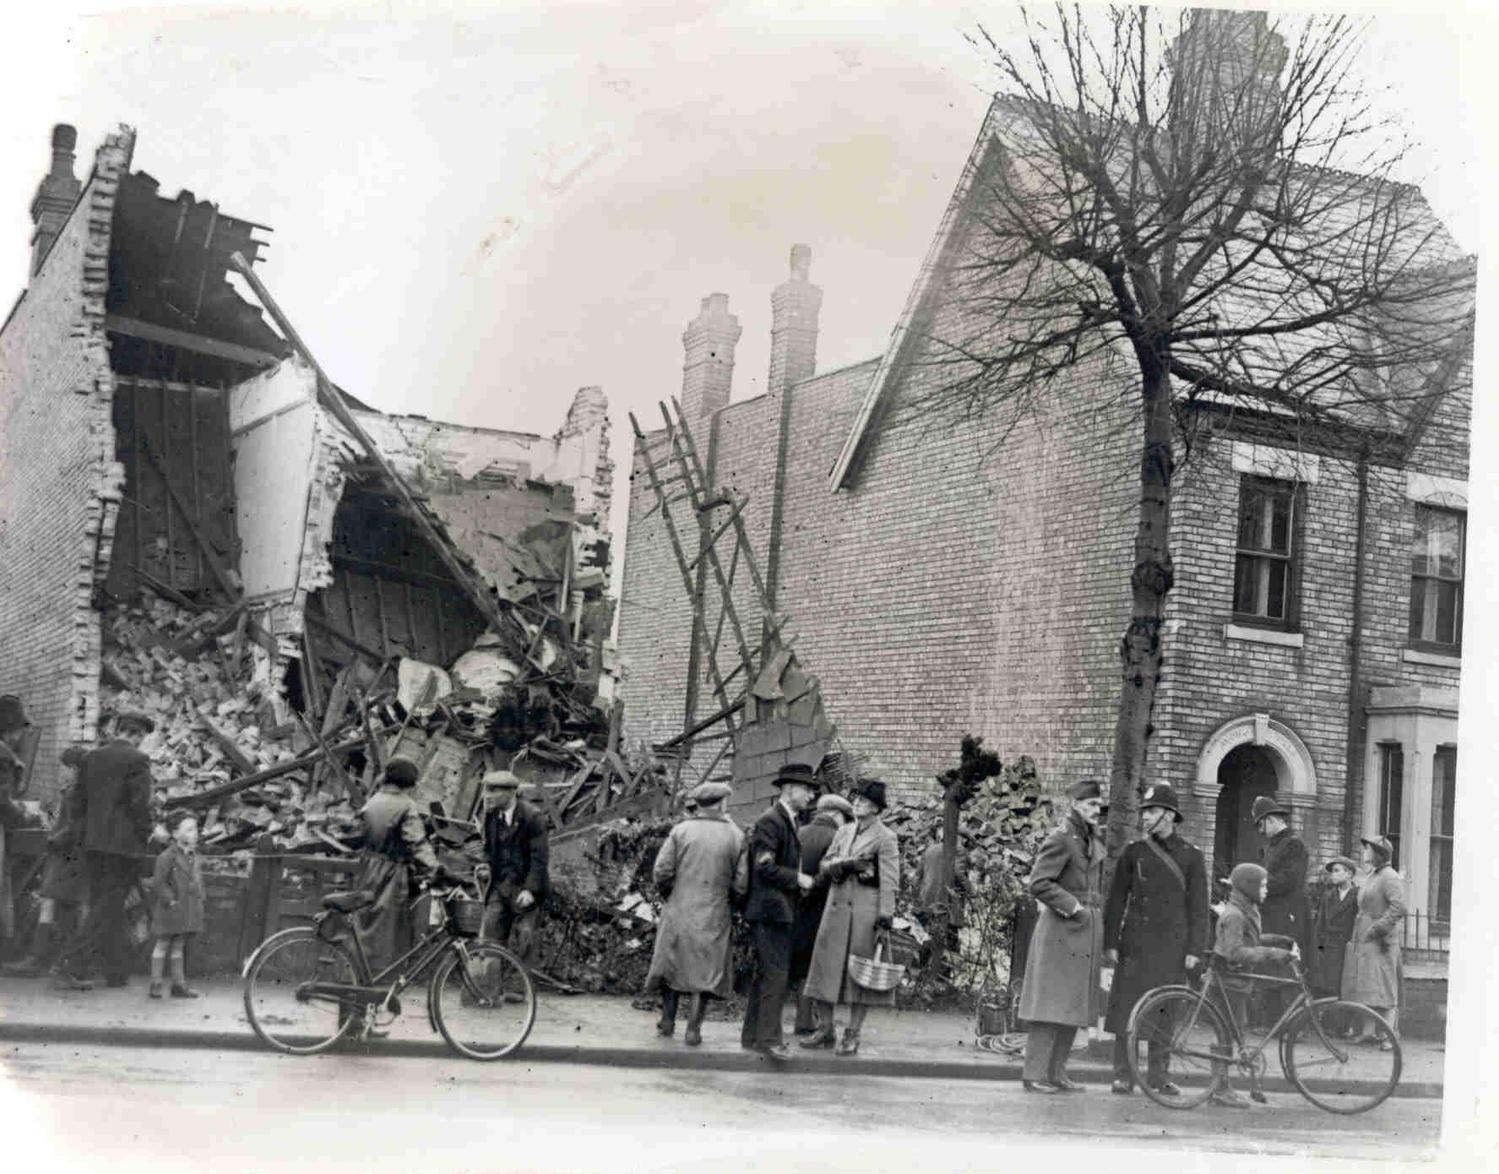 Photograph of a bomb damaged building at 67 London Road, Peterborough, 1940